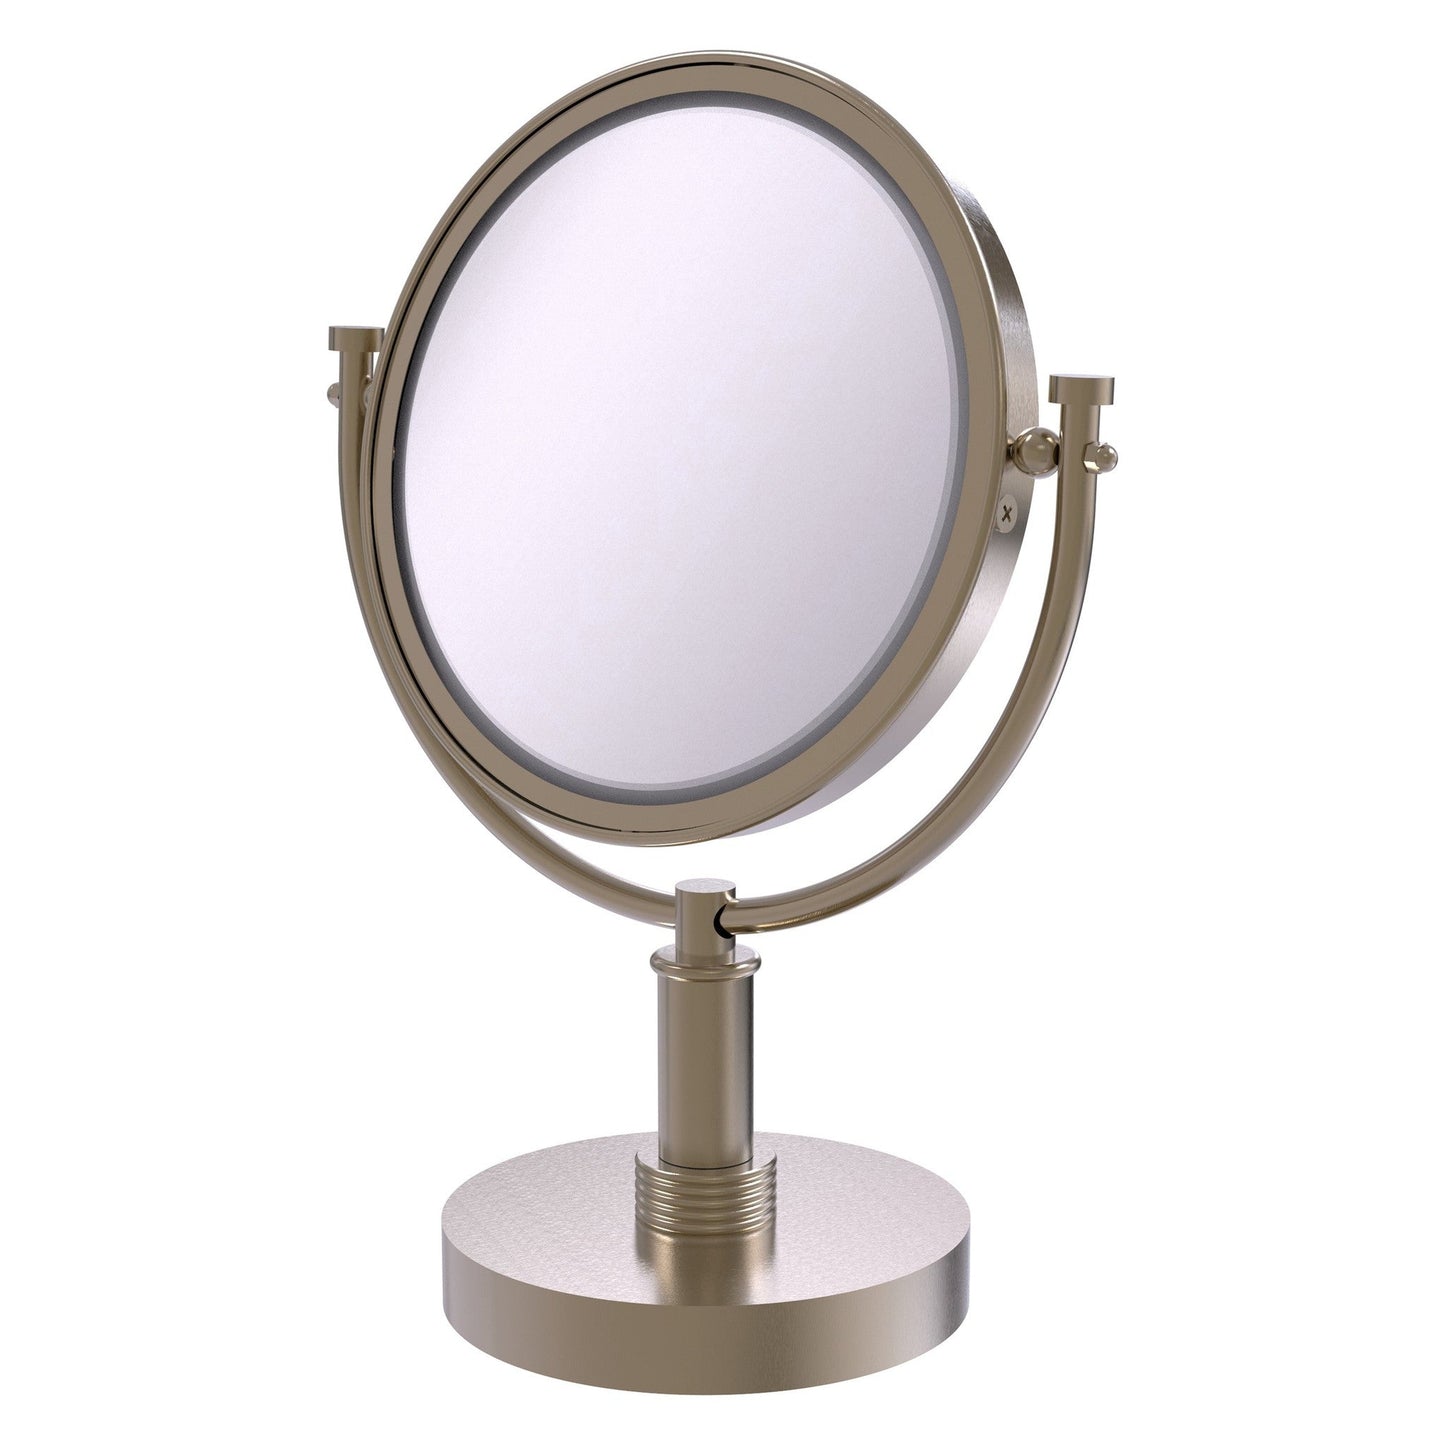 Allied Brass DM-4G/5X 8" x 8" Antique Pewter Solid Brass Vanity Top Make-Up Mirror 5X Magnification